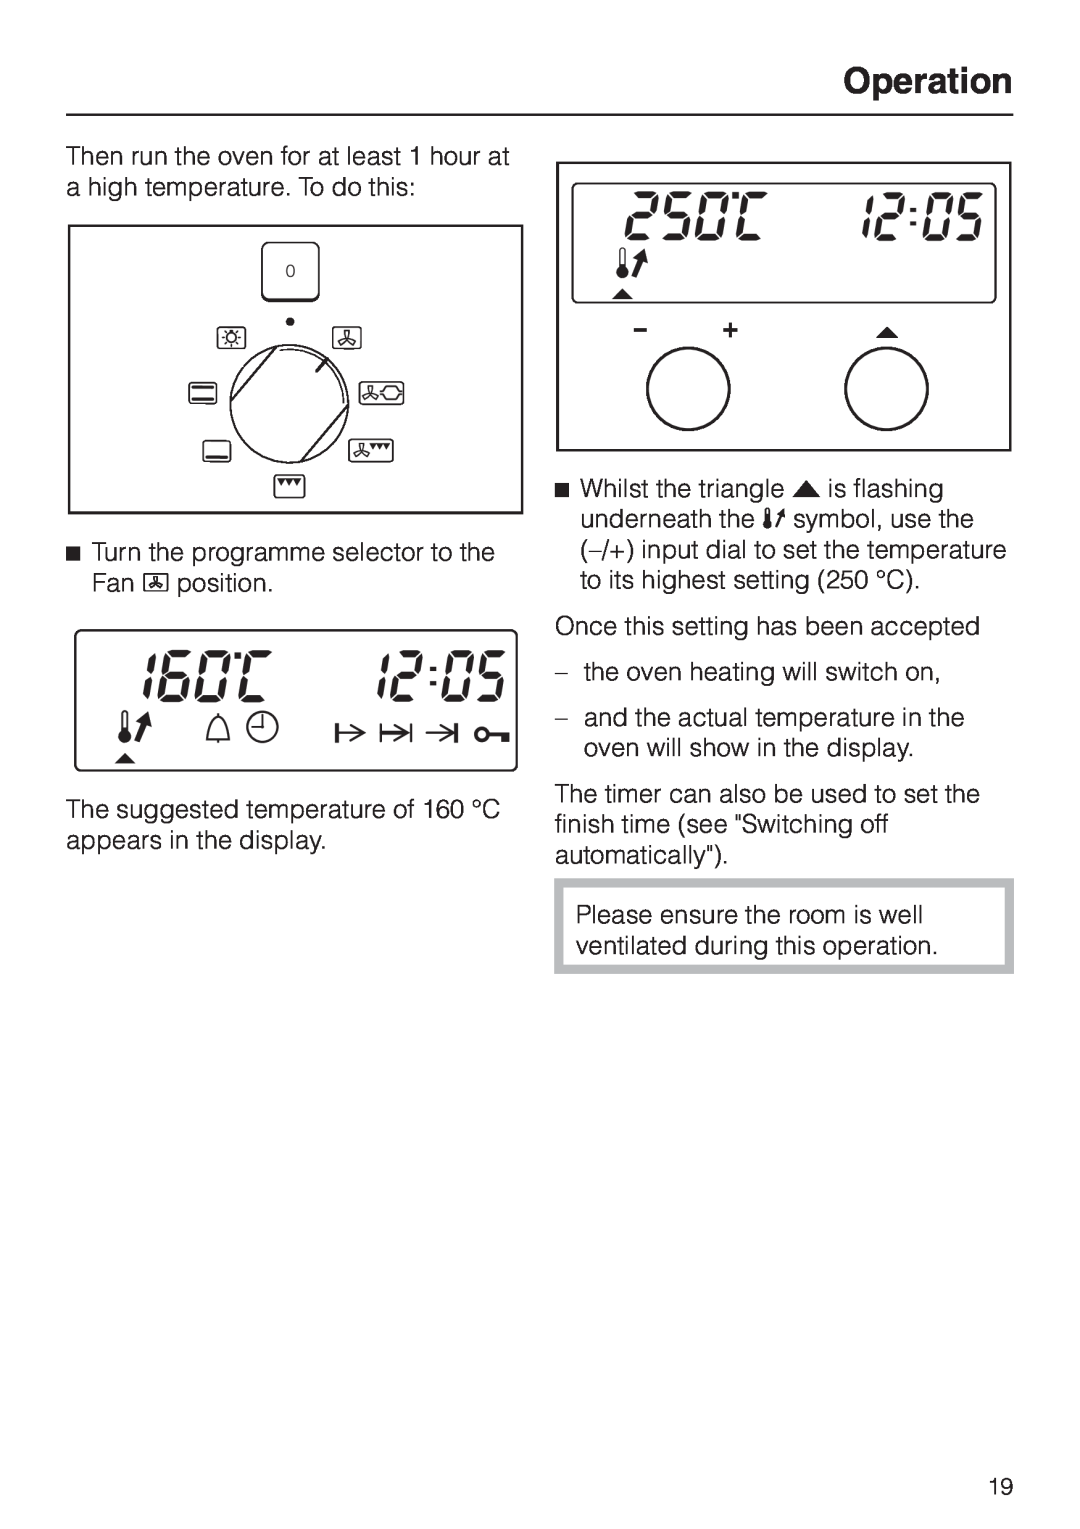 Miele H334B, H 344-2 B manual Operation, Turn the programme selector to the Fan D position 